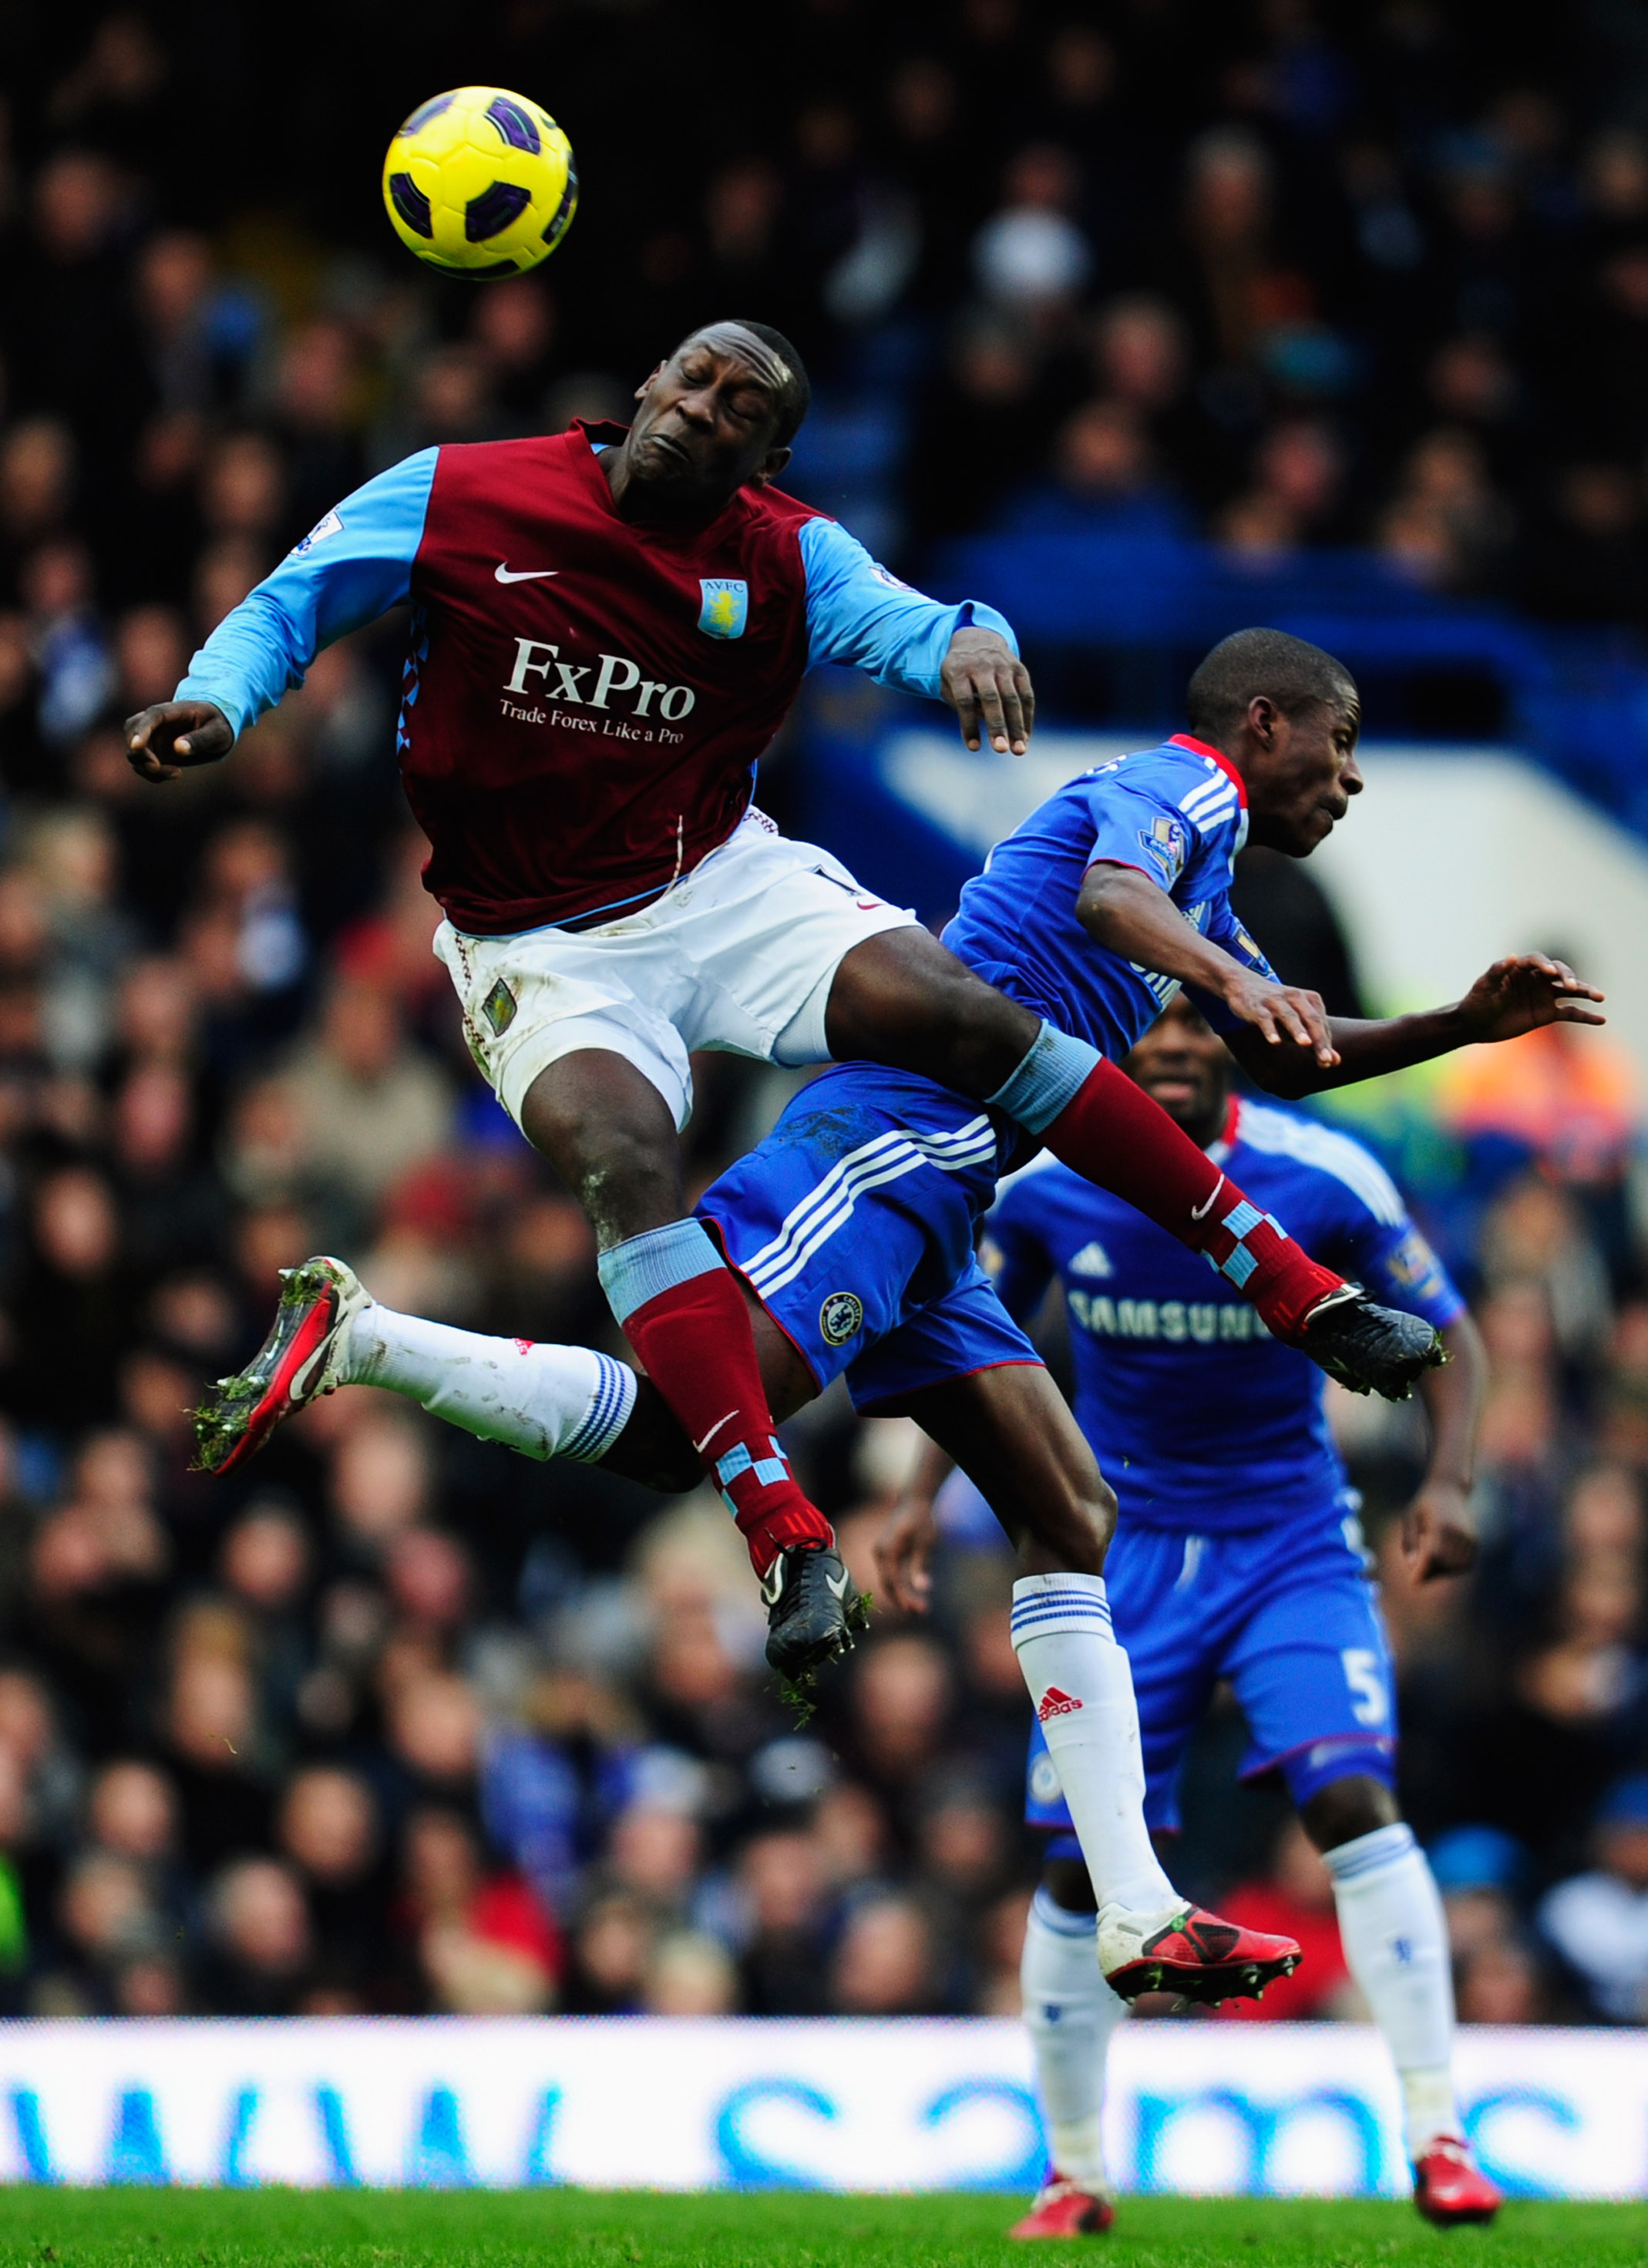 LONDON, ENGLAND - JANUARY 02:  Ramires of Chelsea jumps with Emile Heskey of Aston Villa during the Barclays Premier League match between Chelsea and Aston Villa at Stamford Bridge on January 2, 2011 in London, England.  (Photo by Jamie McDonald/Getty Ima